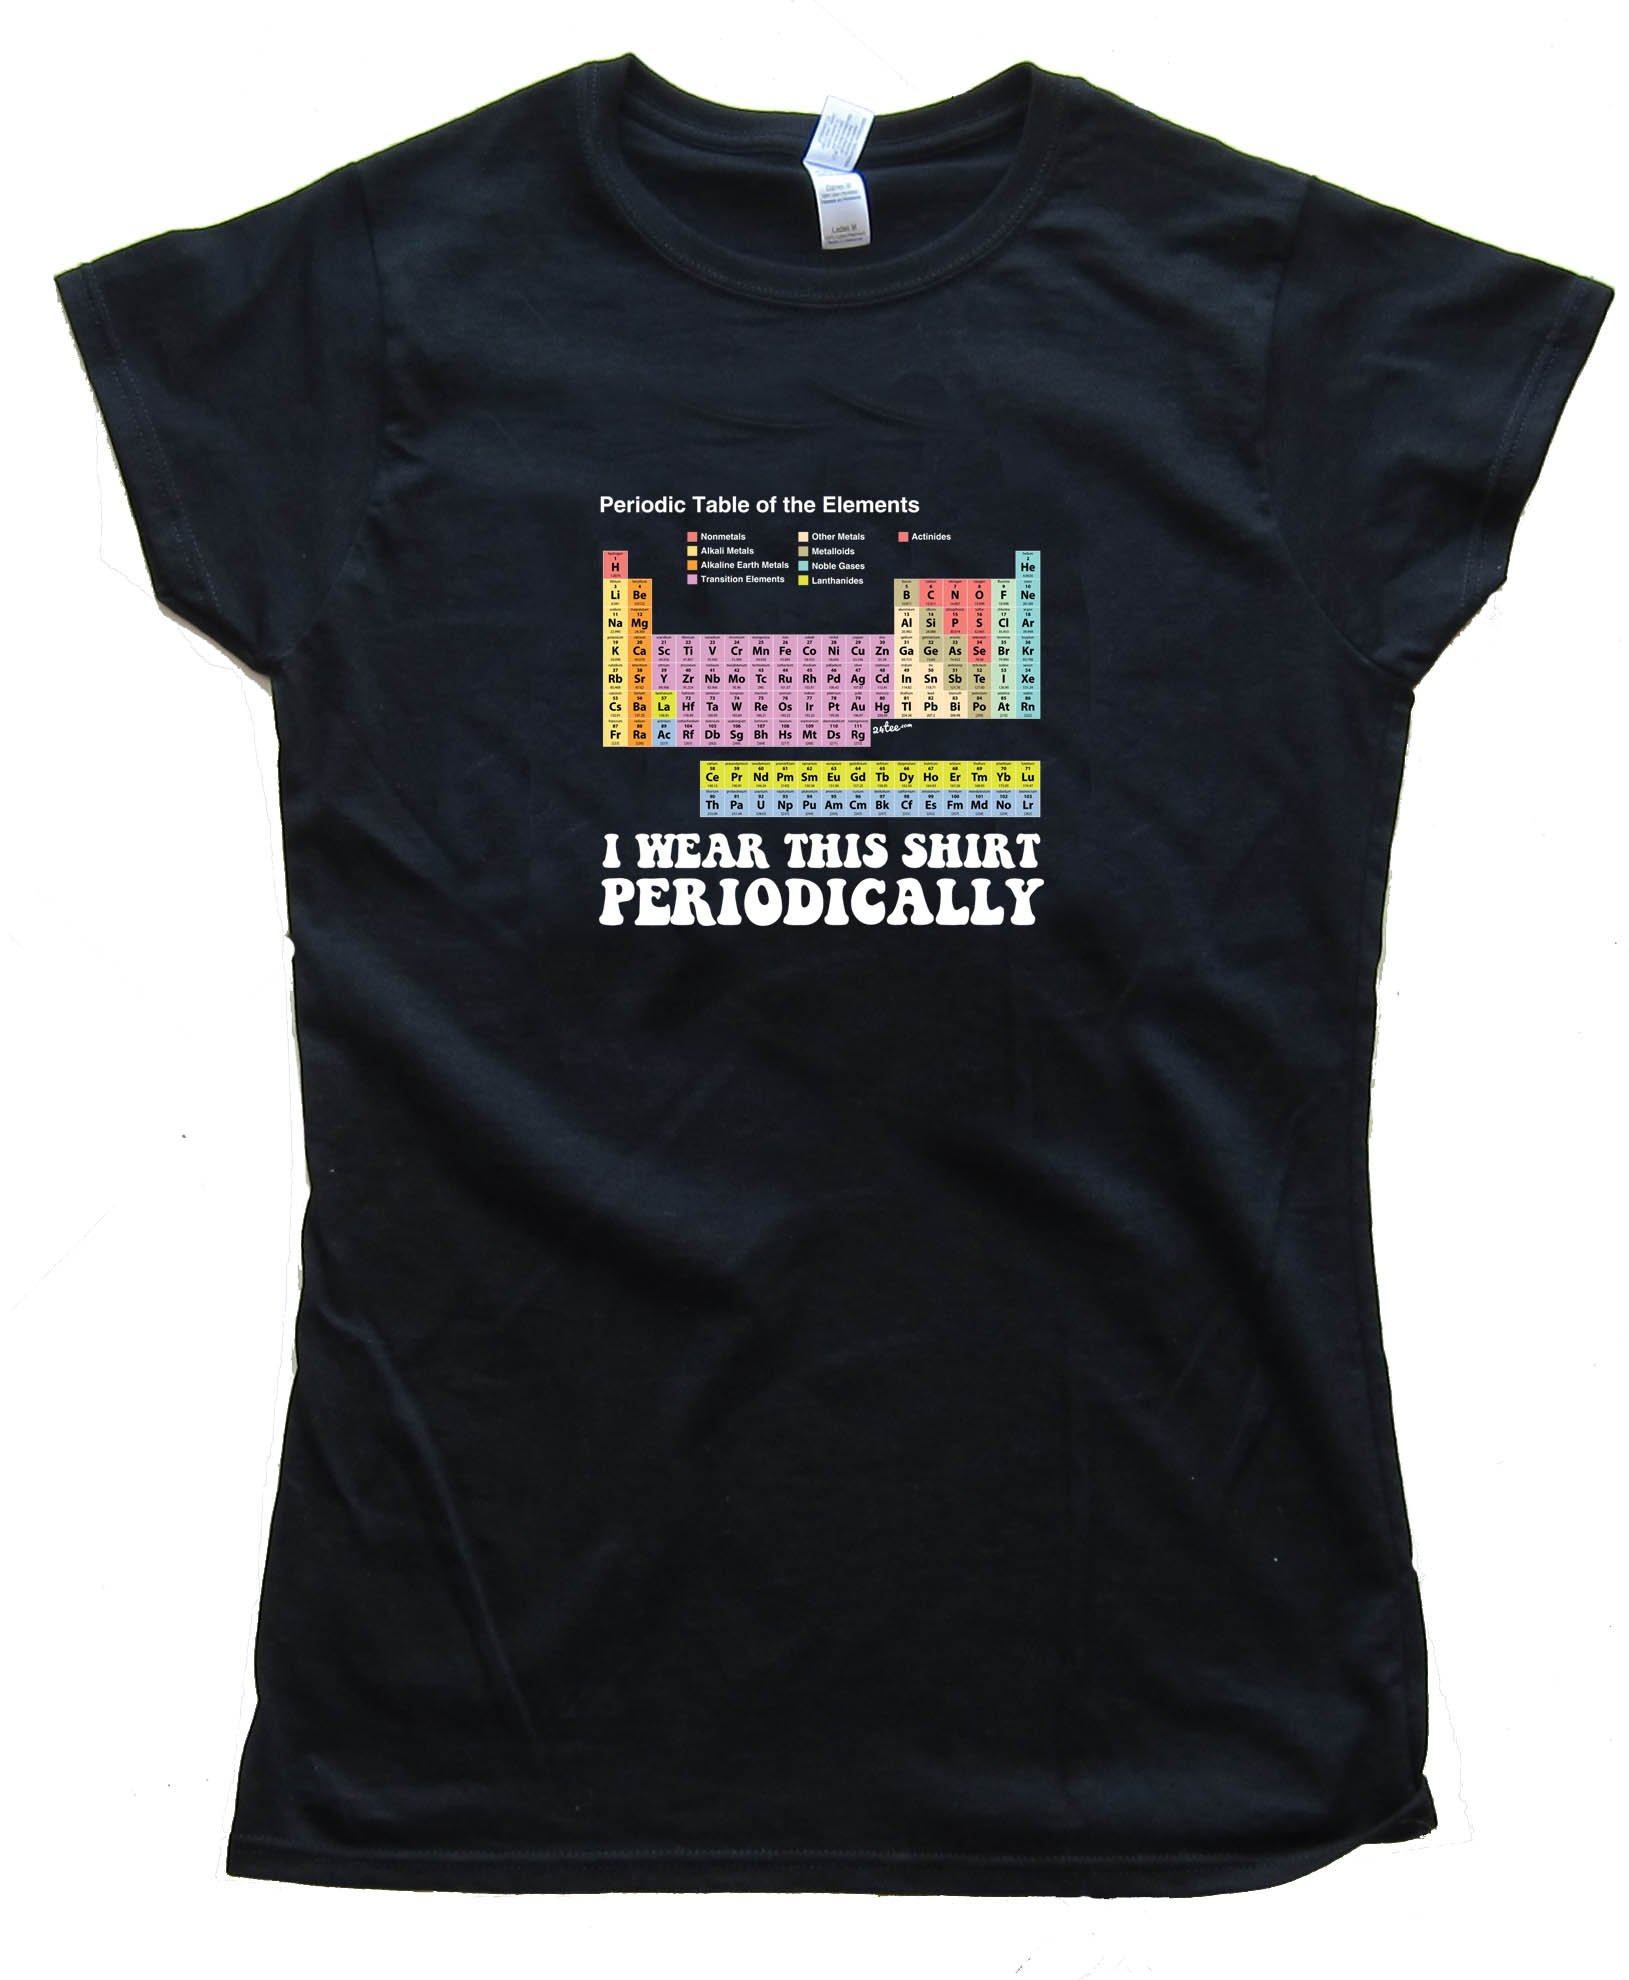 Womens Colorful I Wear This Shirt Periodically - Tee Shirt